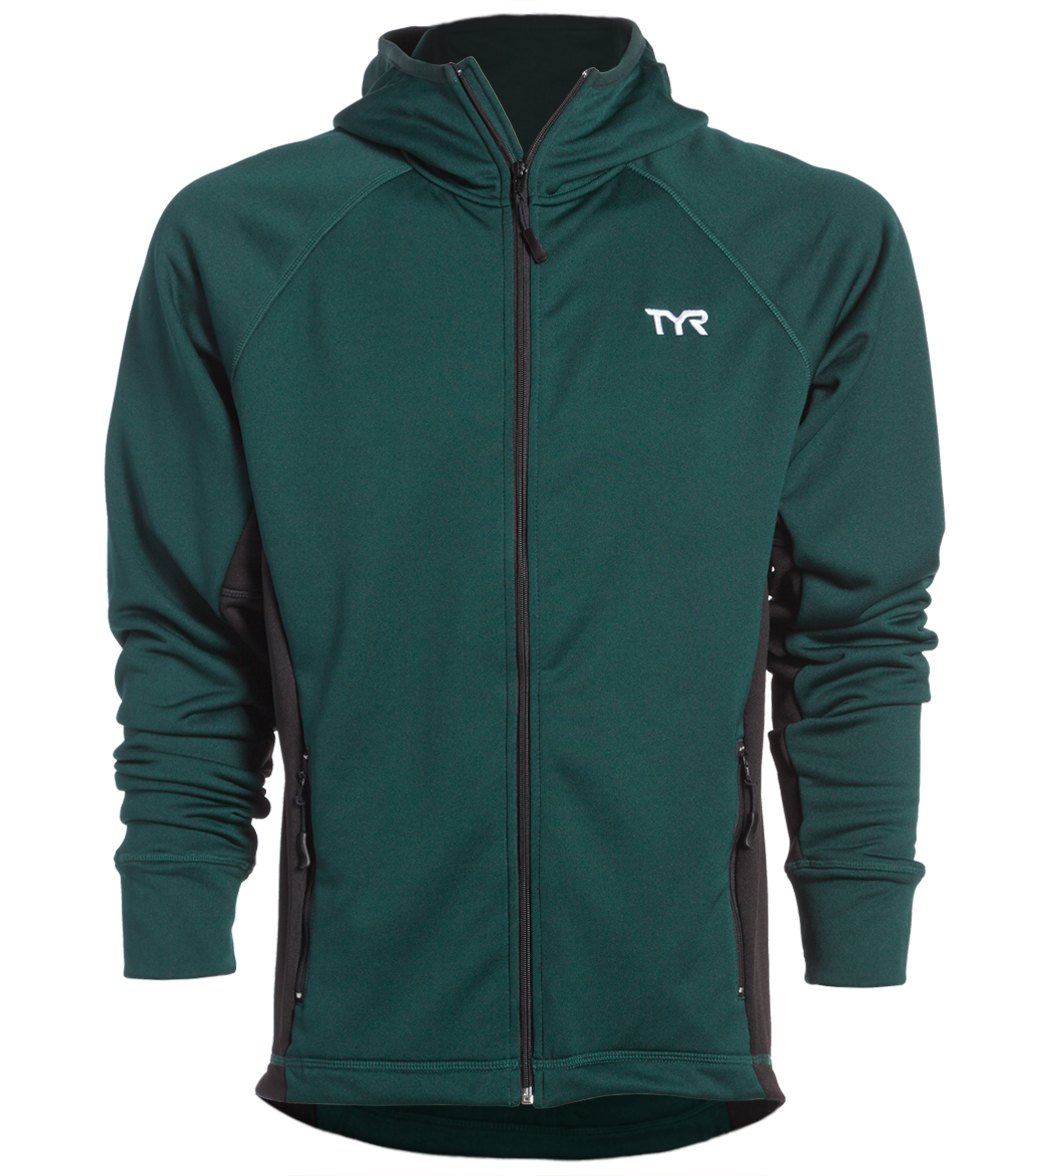 TYR Alliance Victory Male Warm Up Jacket at SwimOutlet.com - Free Shipping